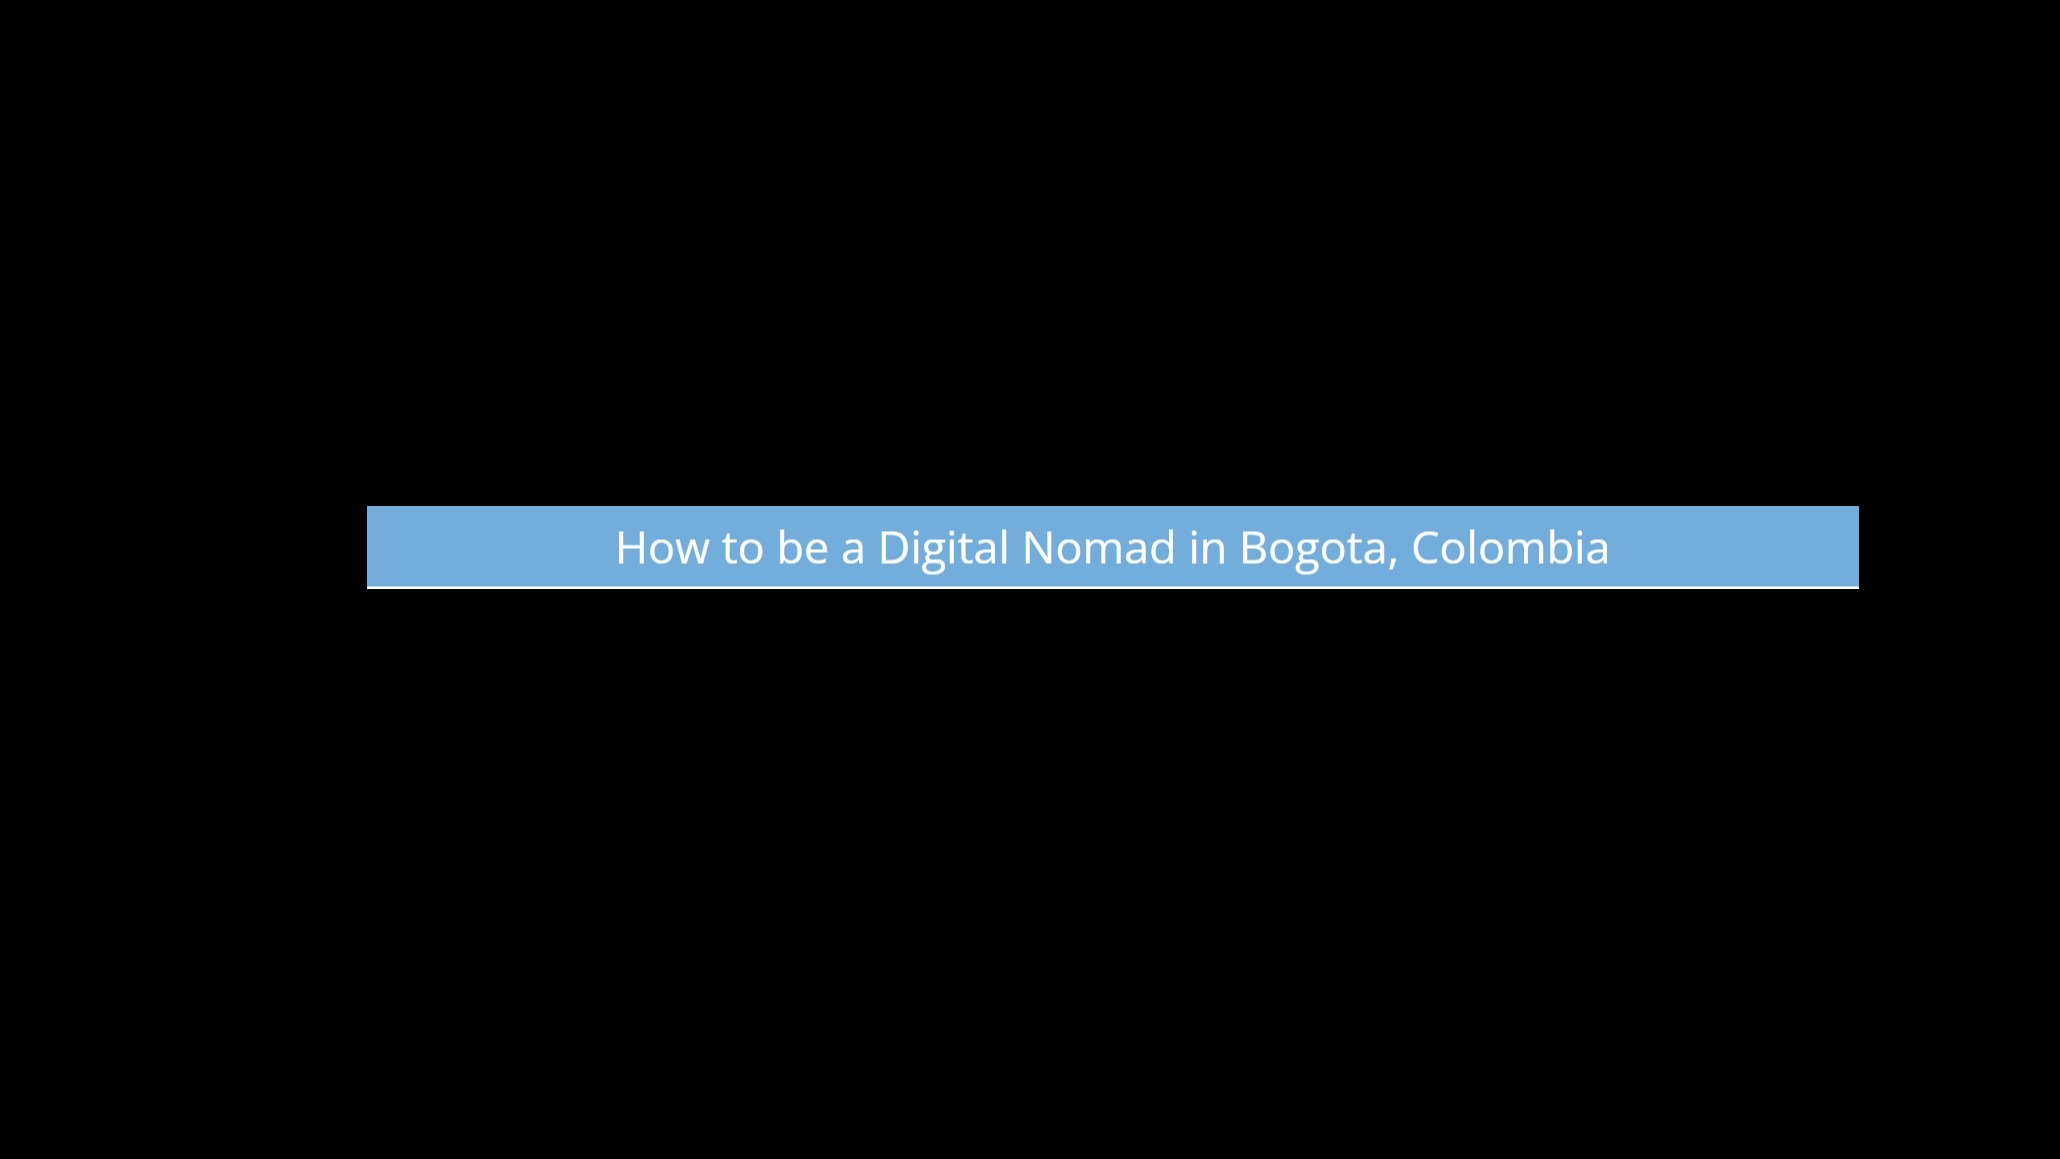 Plan Your Bogota Freelancing Holiday With This Digital Nomad Tourism Guide